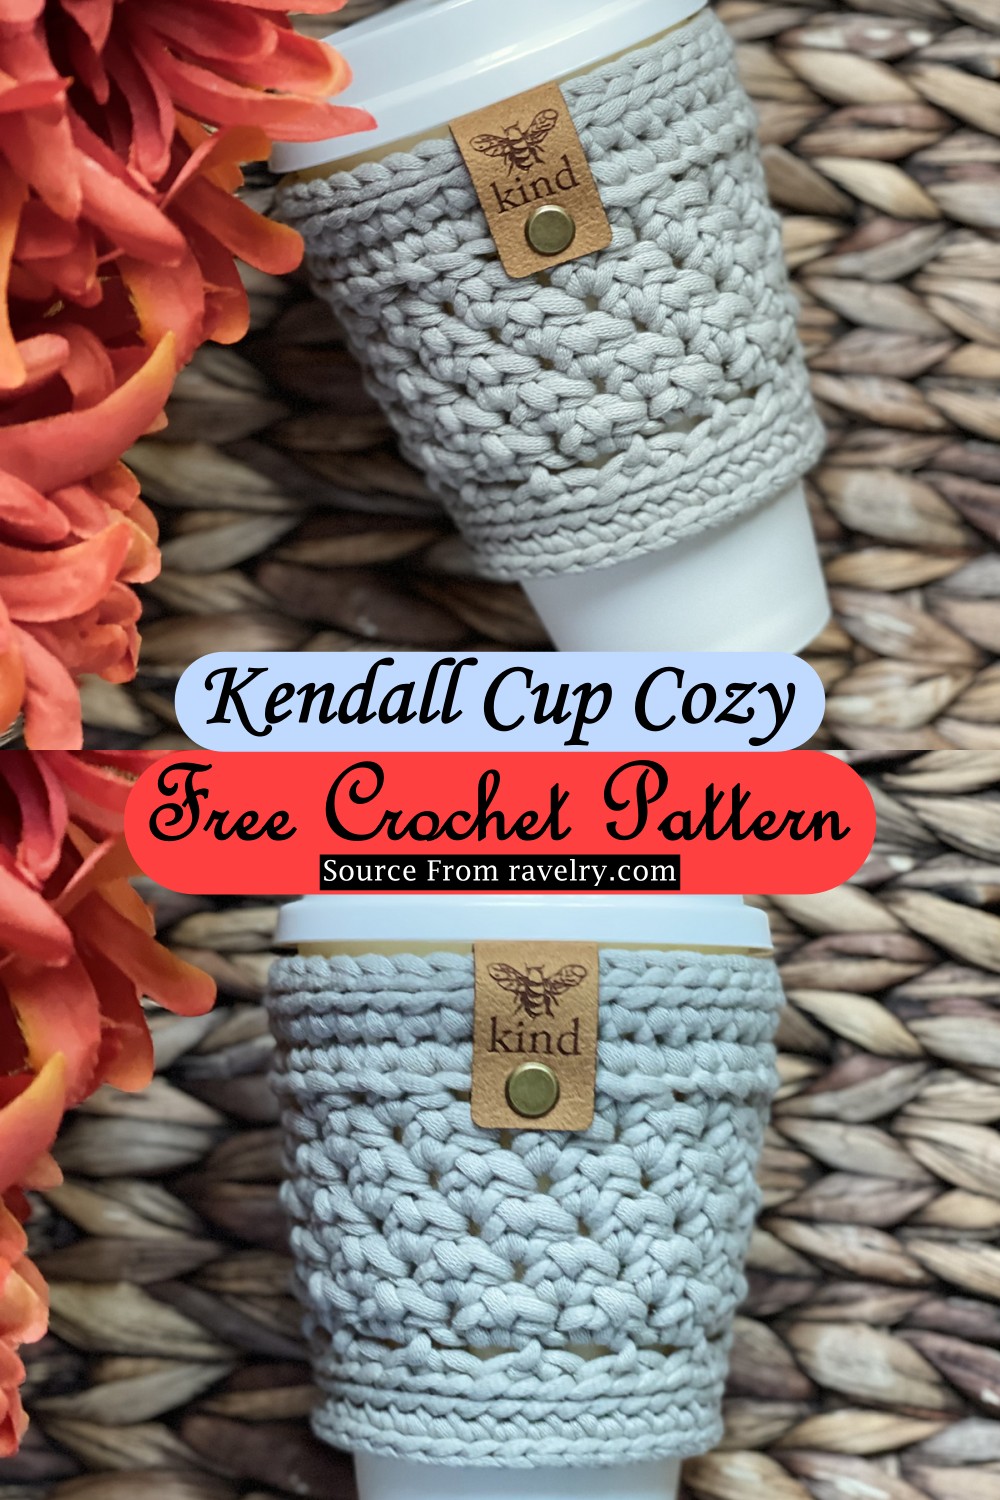 Kendall Cup Cozy